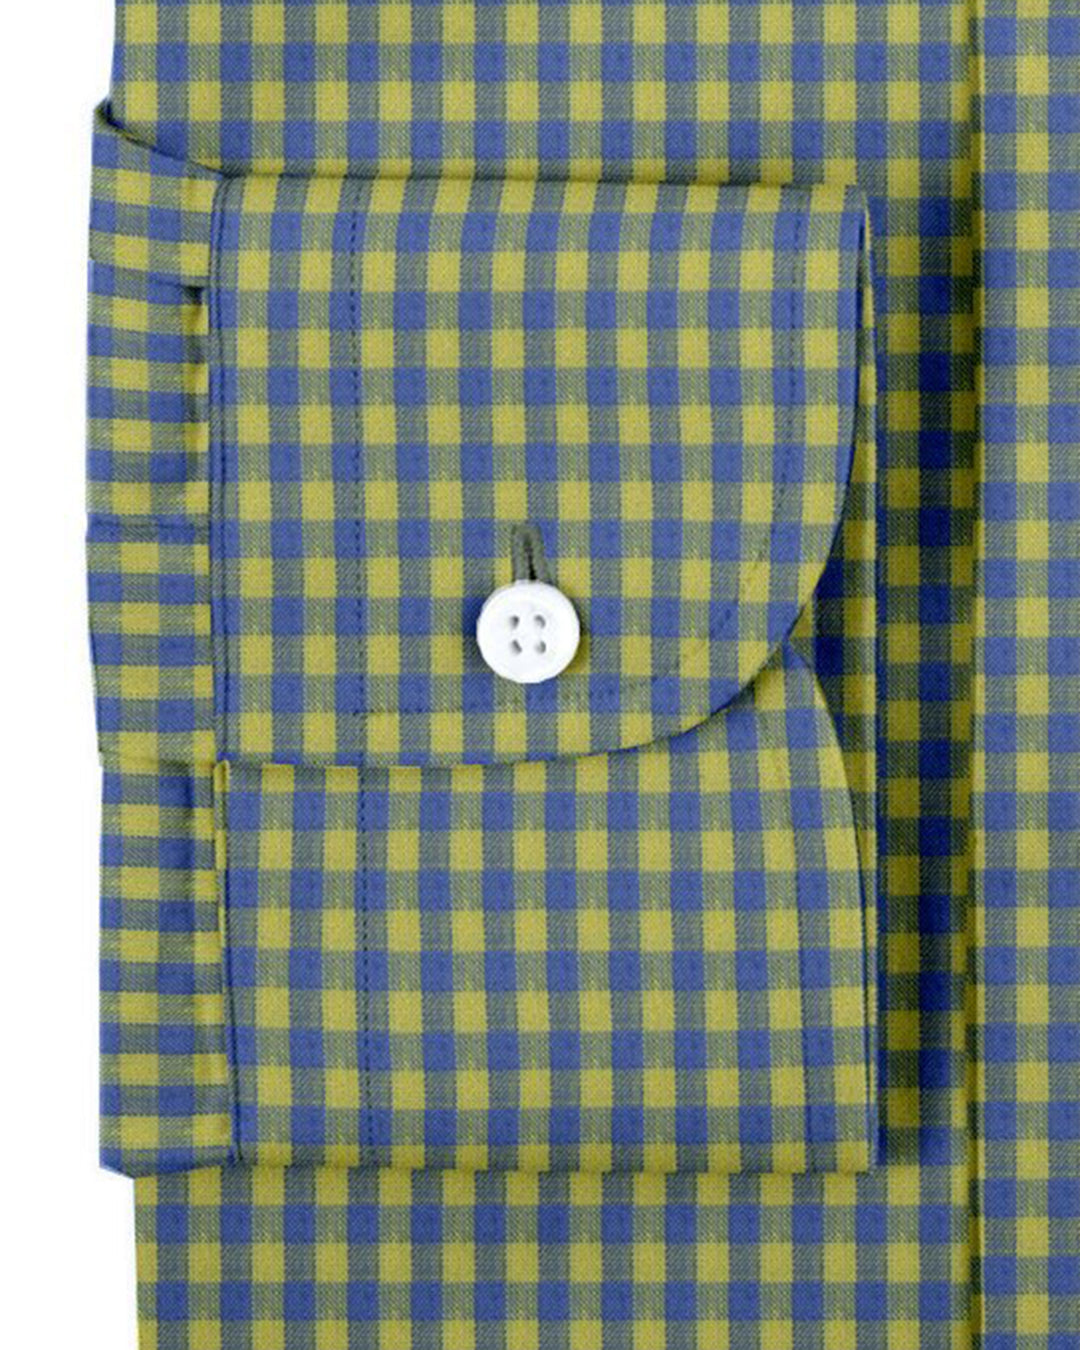 Cuff of custom linen shirt for men in yellow and blue gingham